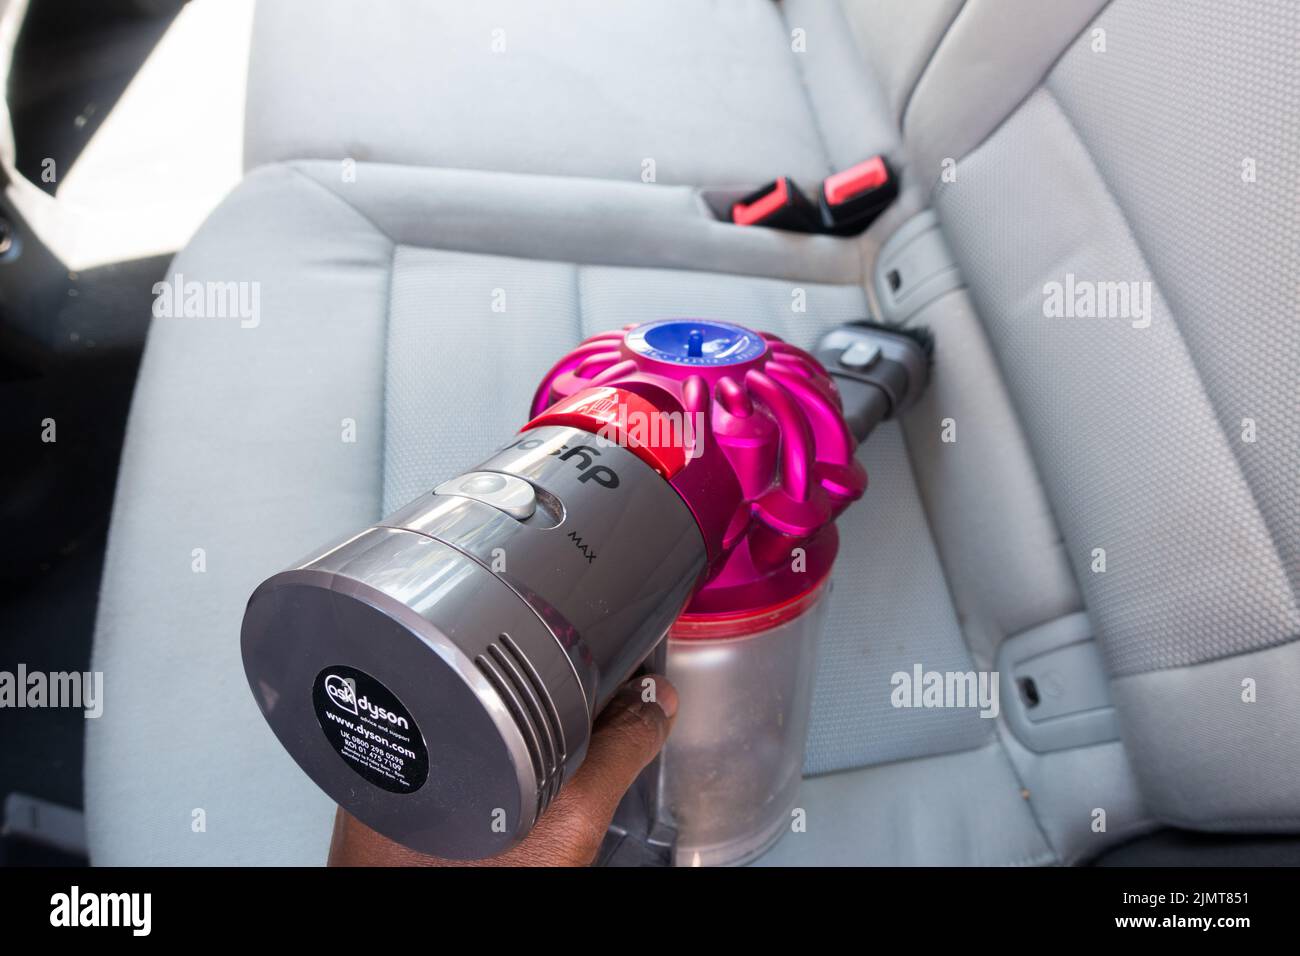 Adult male hands using a wireless vacuum cleaner on Car seat Stock Photo